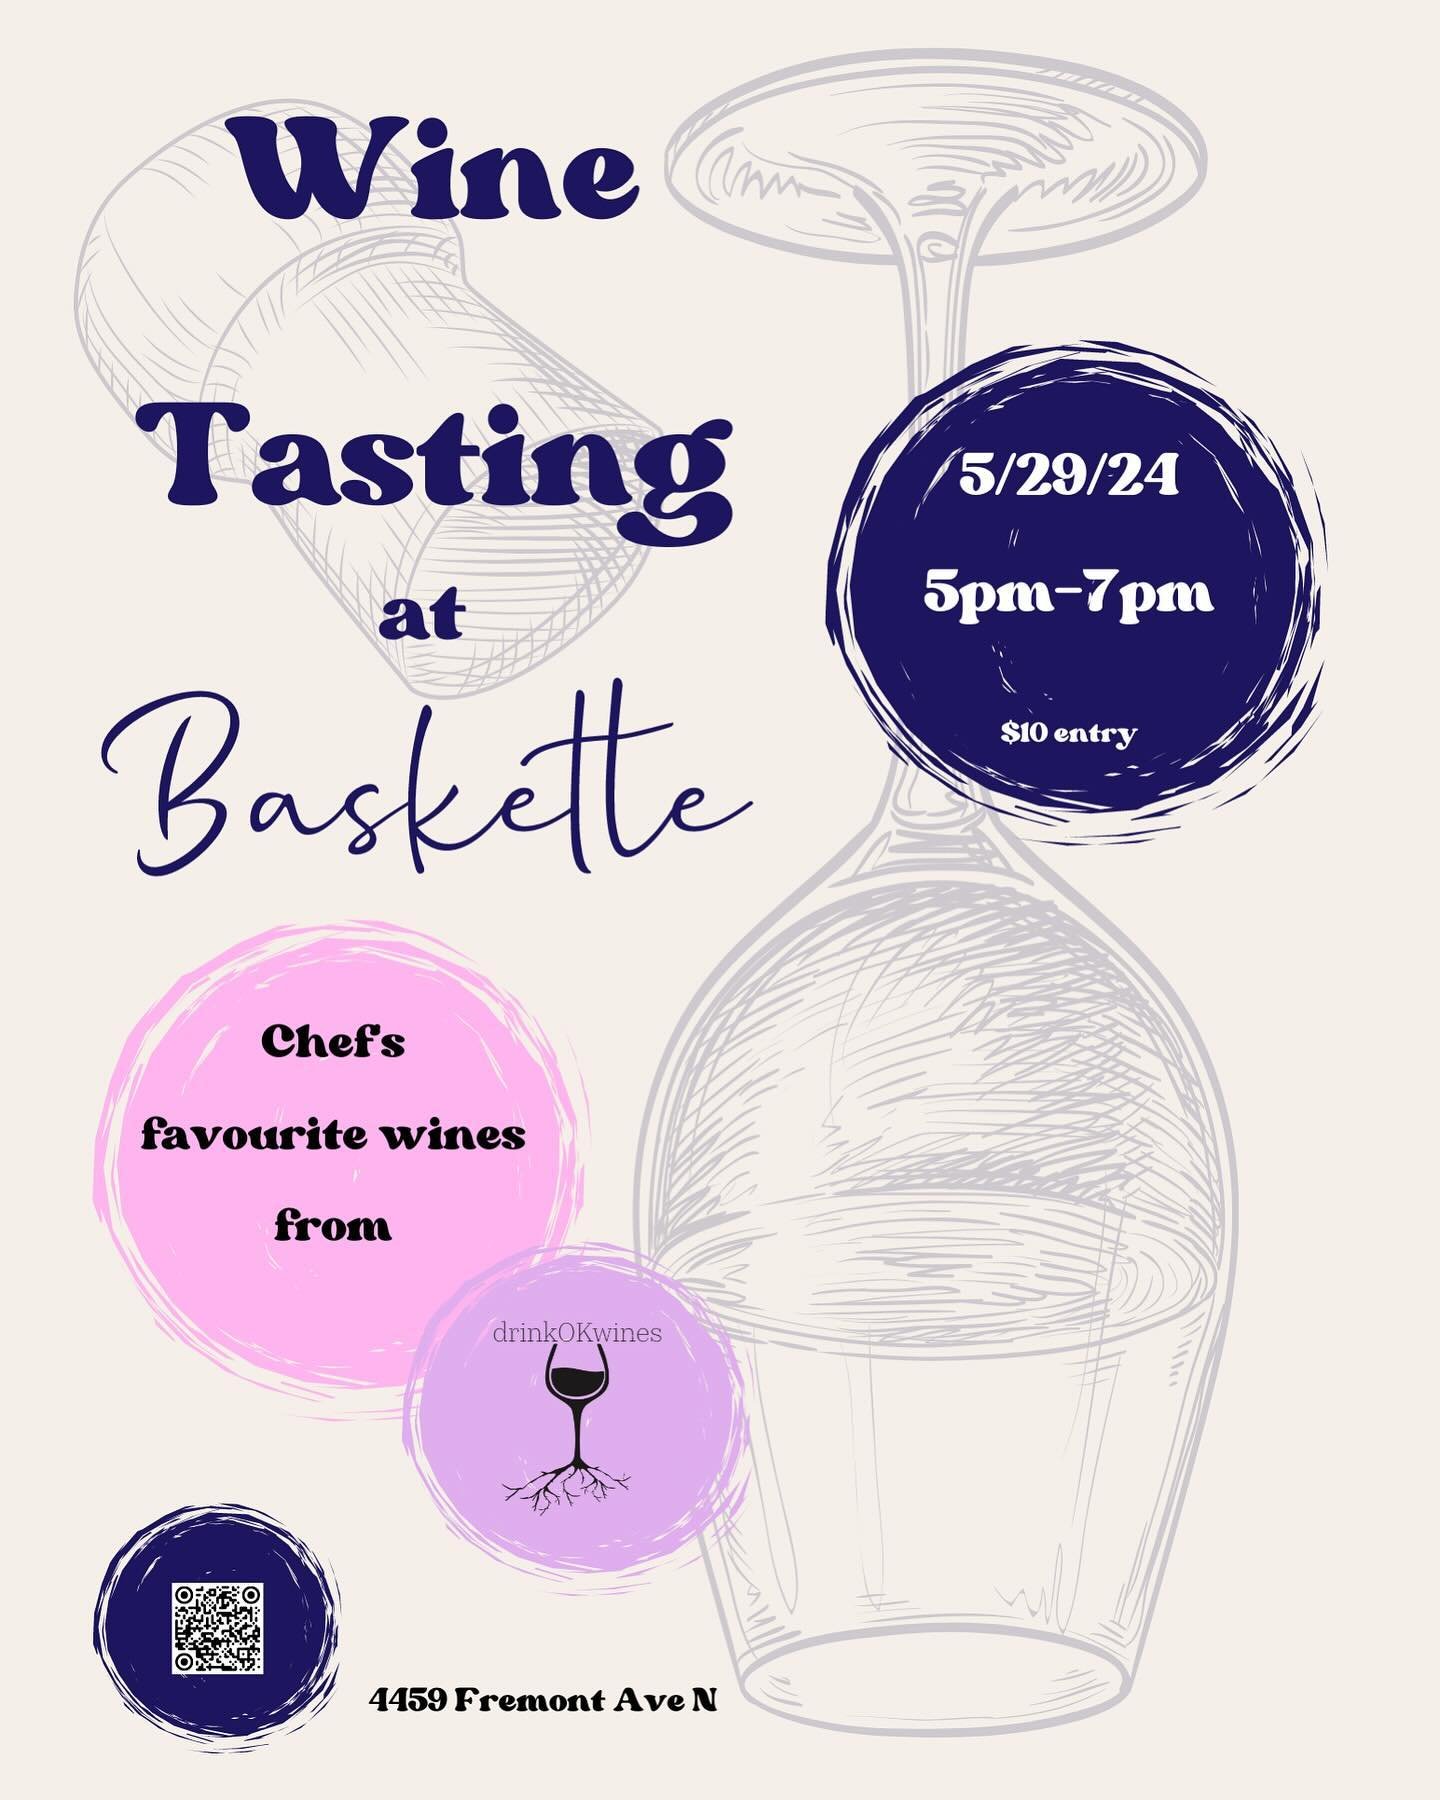 Chef is so excited for this one! We&rsquo;re going to be tasting his favorite wines from @drinkokwines !! Swing by for some wine, some snacks, and some good vibes. New hours are 5-7pm! Bring a date. Bring a friend. Bring your questions on natural win